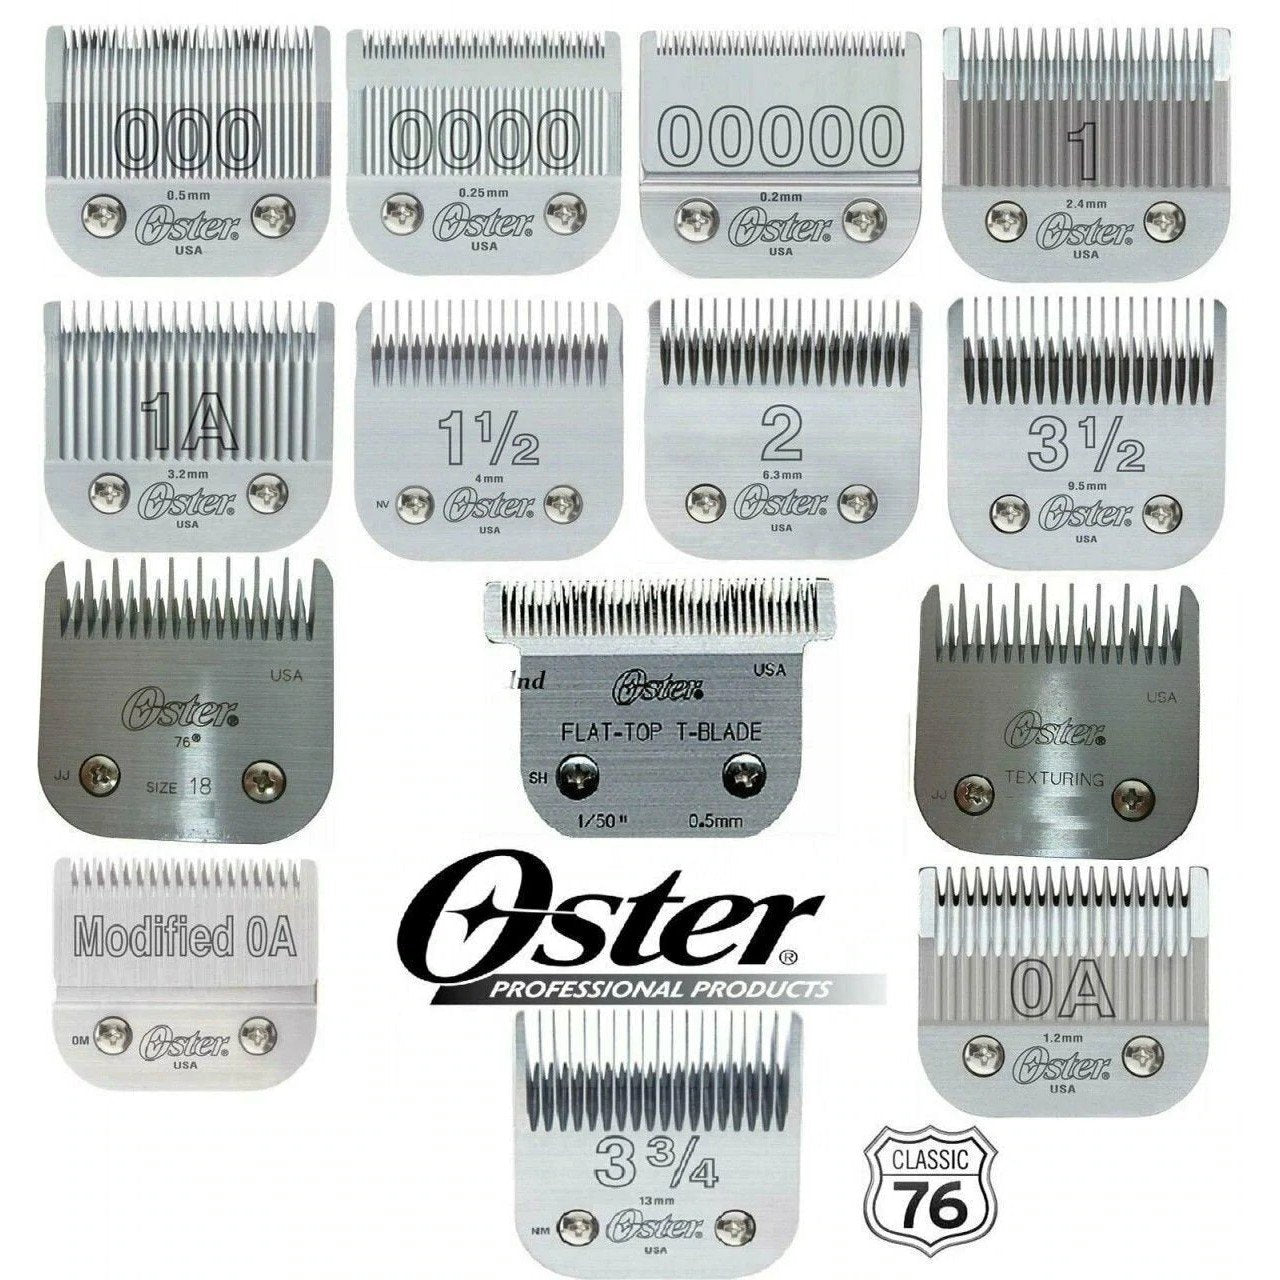 Oster Classic 76 Replacement Detachable Blades